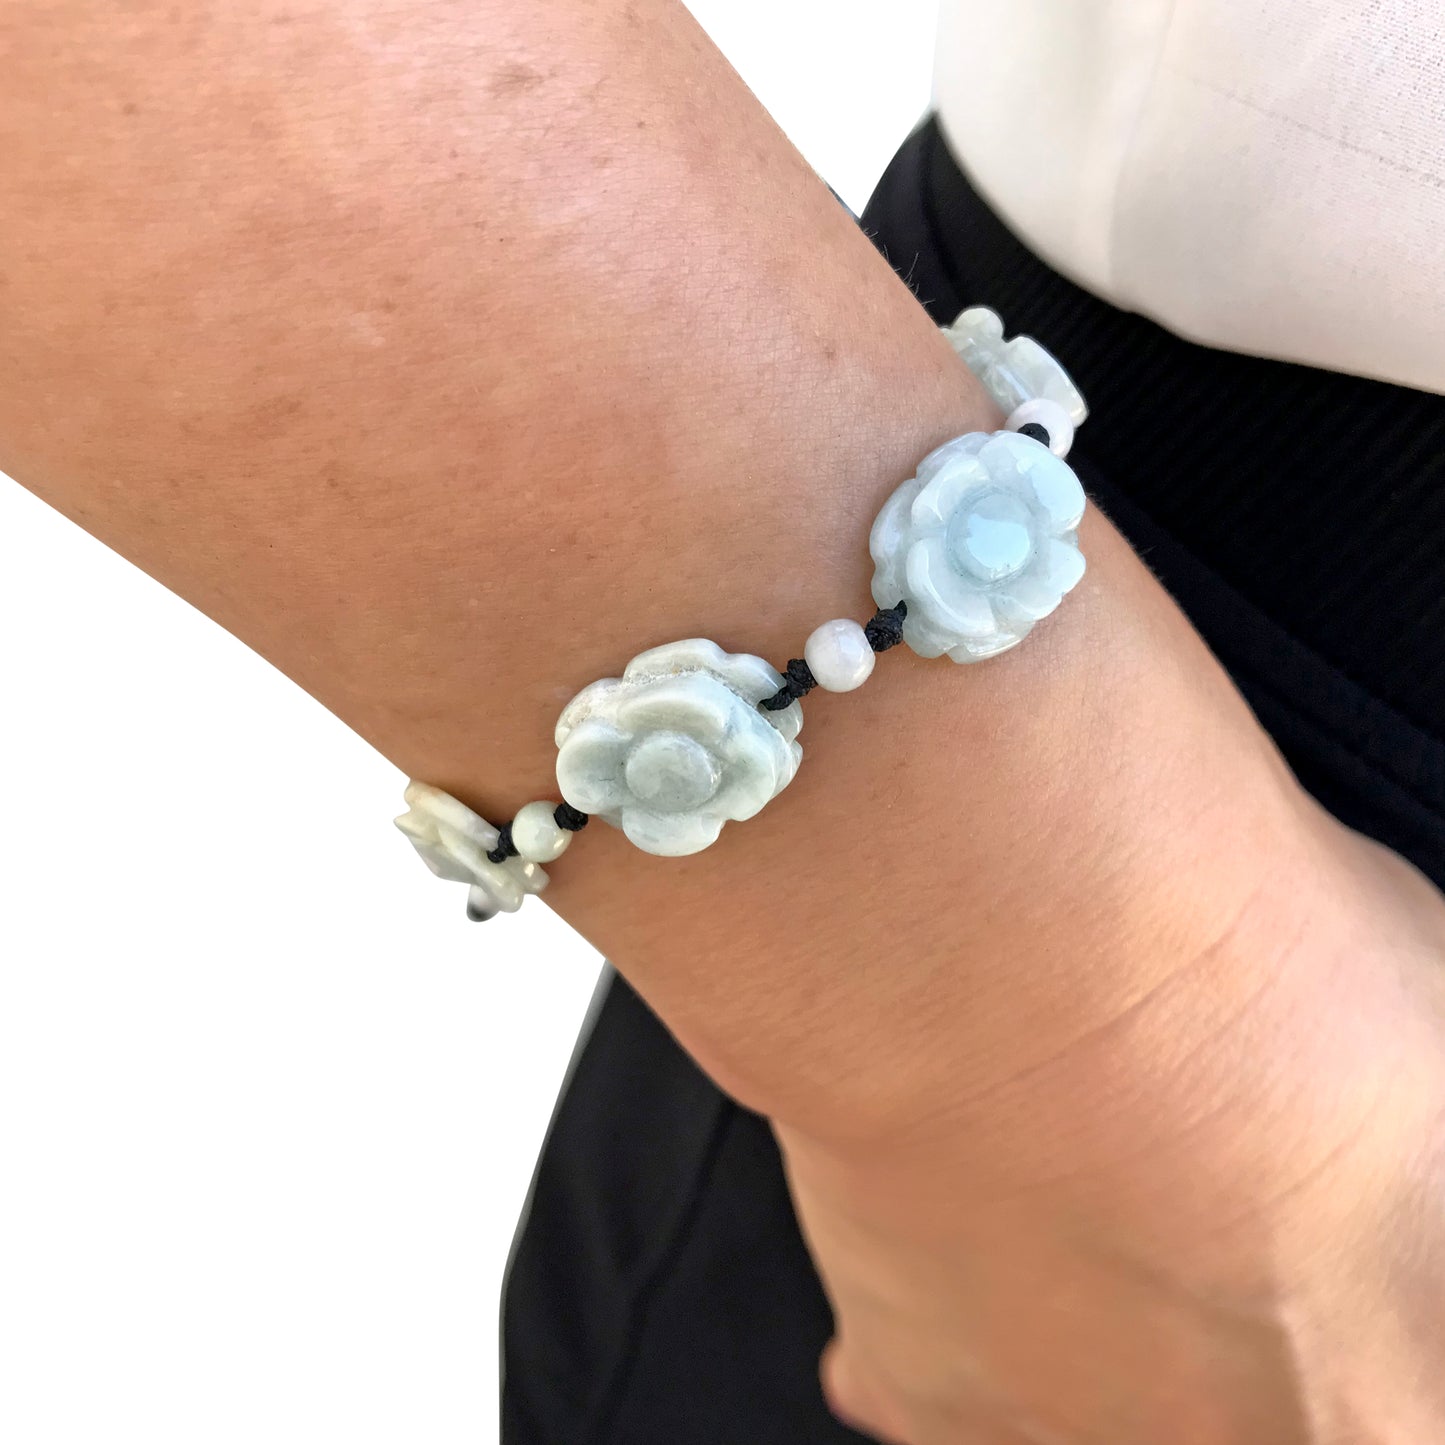 Get the Look You Love with Purity of Life: Waterlily Jade Bracelet